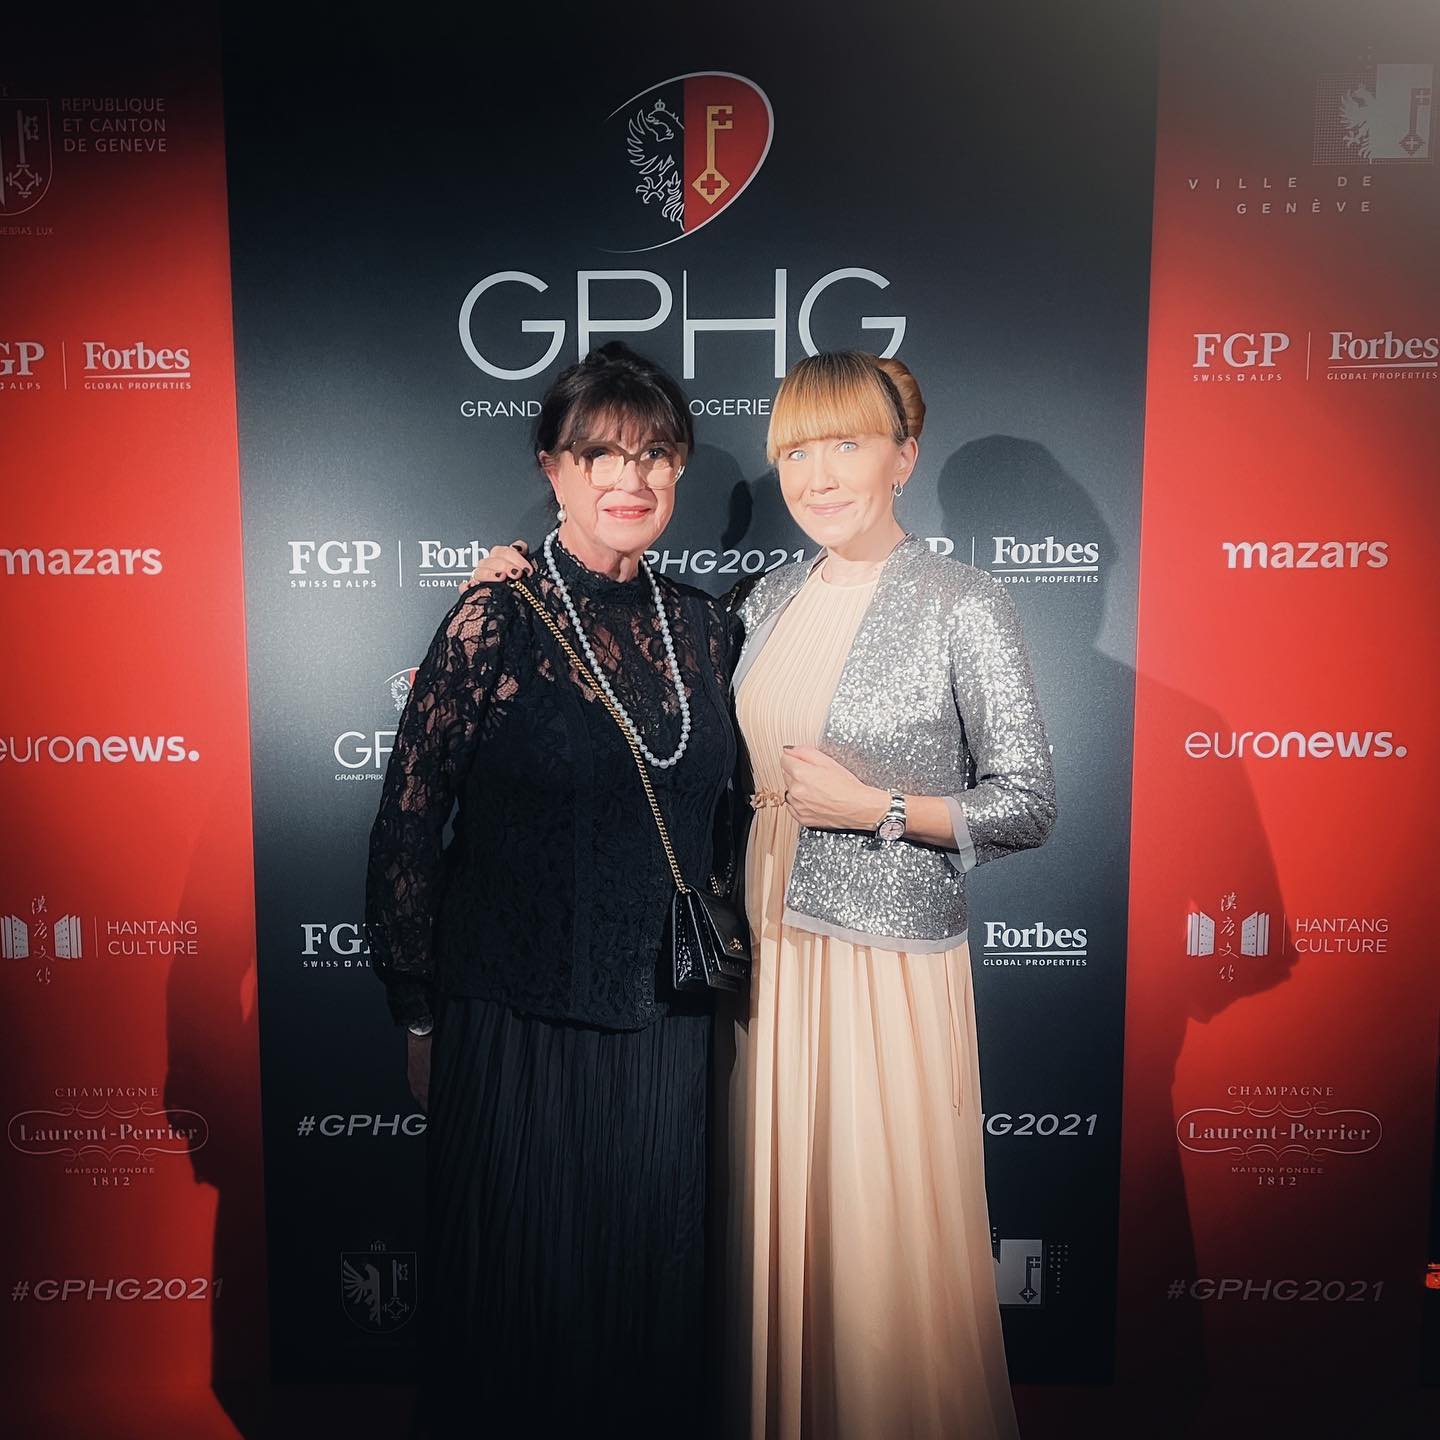 Thank you @gphg_official for bringing all the watch lovers together and for a lovely gala Grand Prix d’horlogerie de Genève! ❤️
#gphg #gphg2021 #geneva #watches